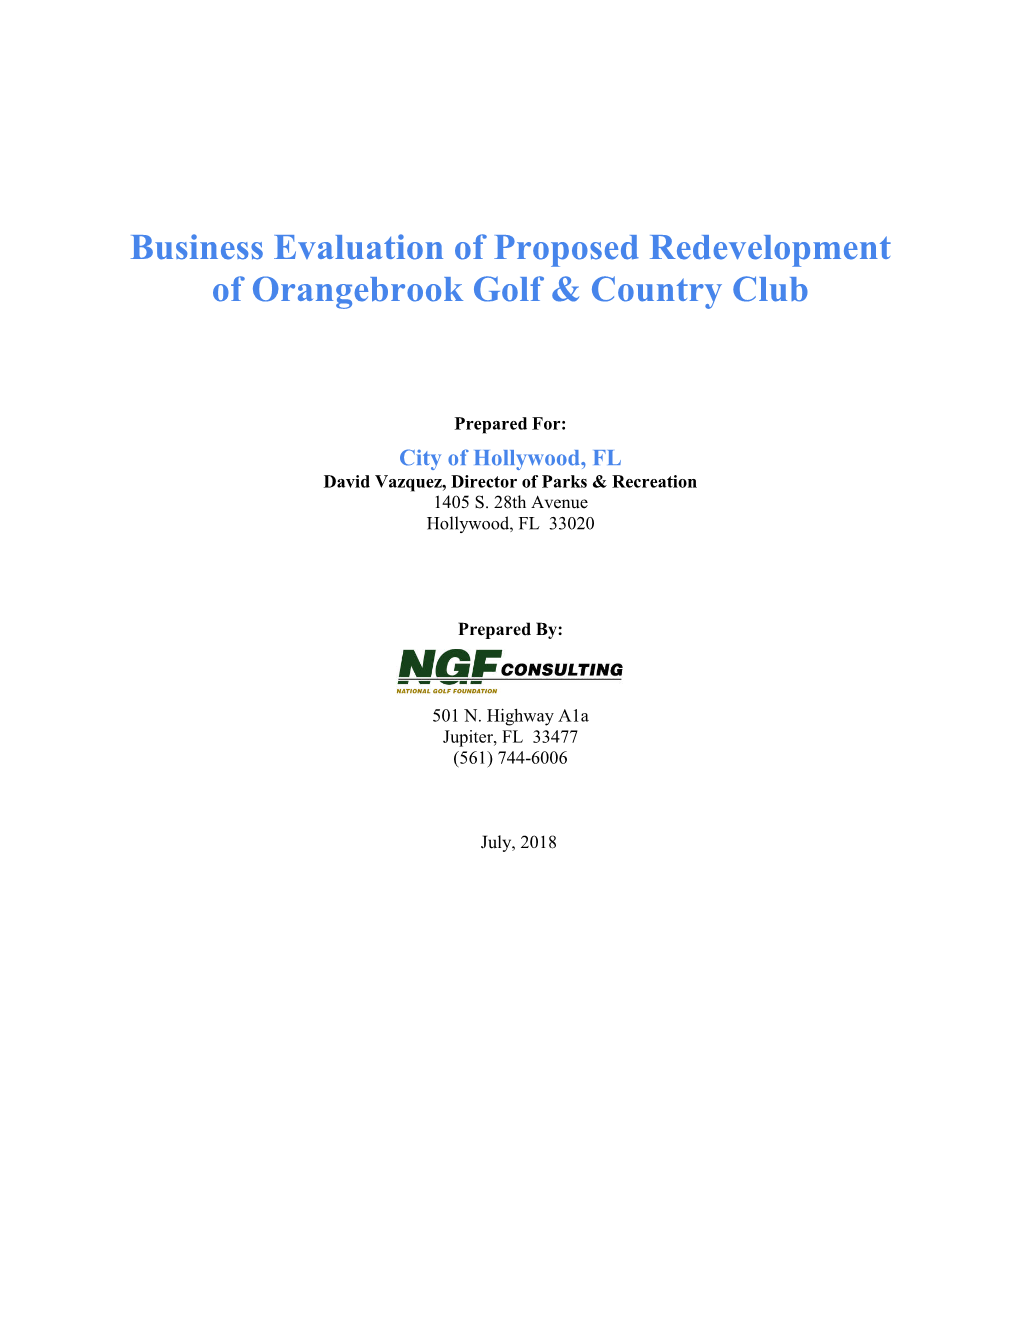 Business Evaluation of Proposed Redevelopment of Orangebrook Golf & Country Club